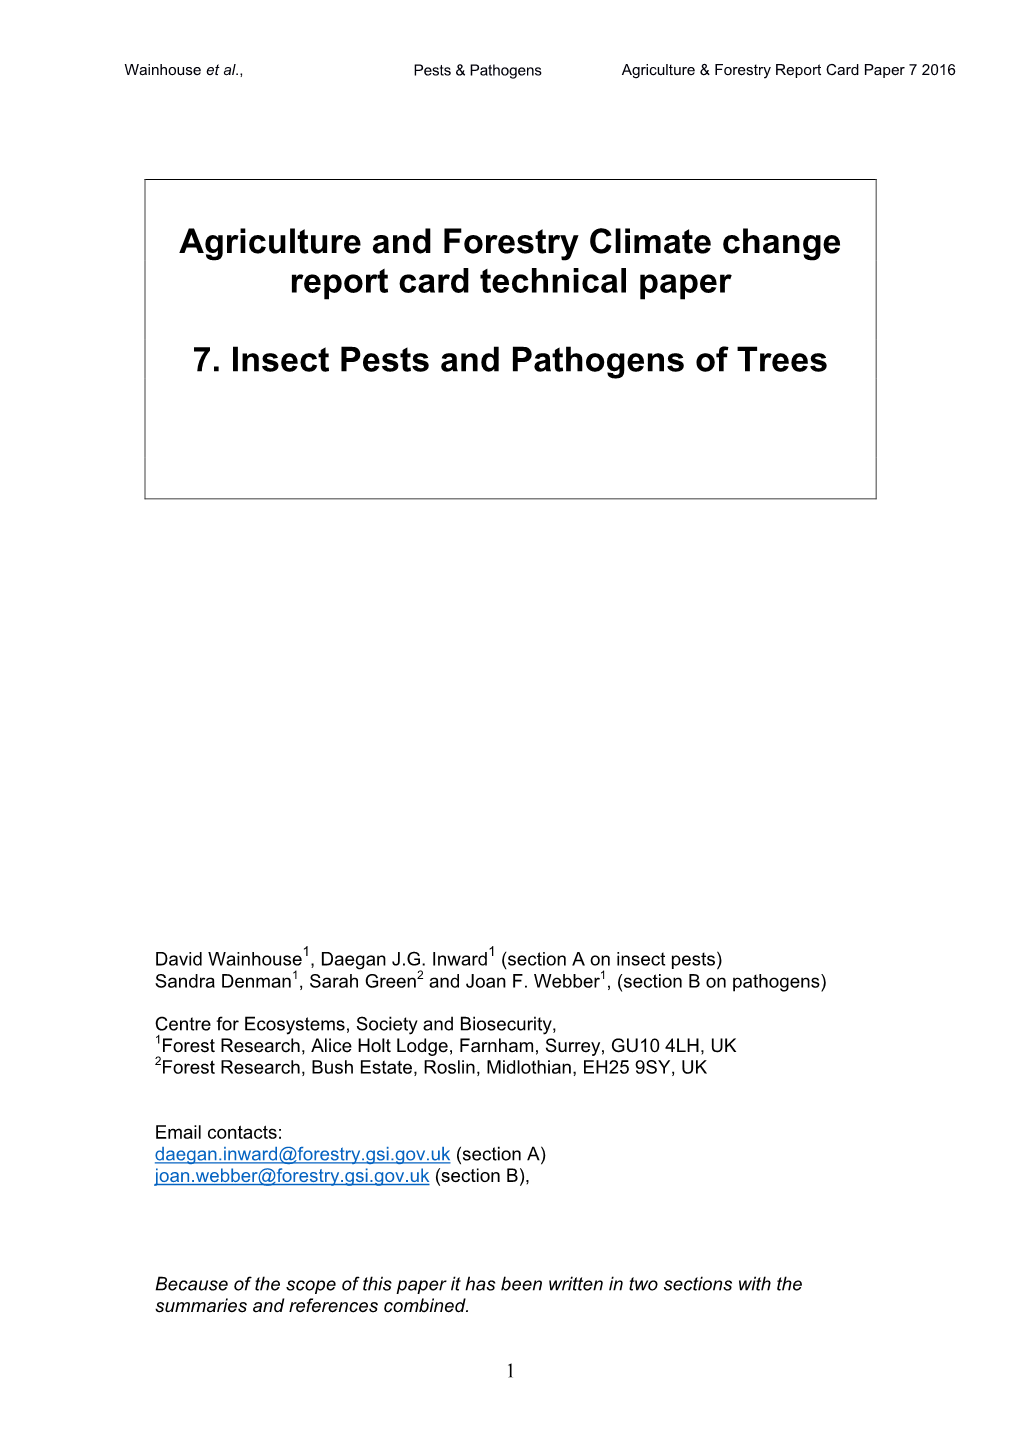 Agriculture and Forestry Climate Change Impacts Report Card